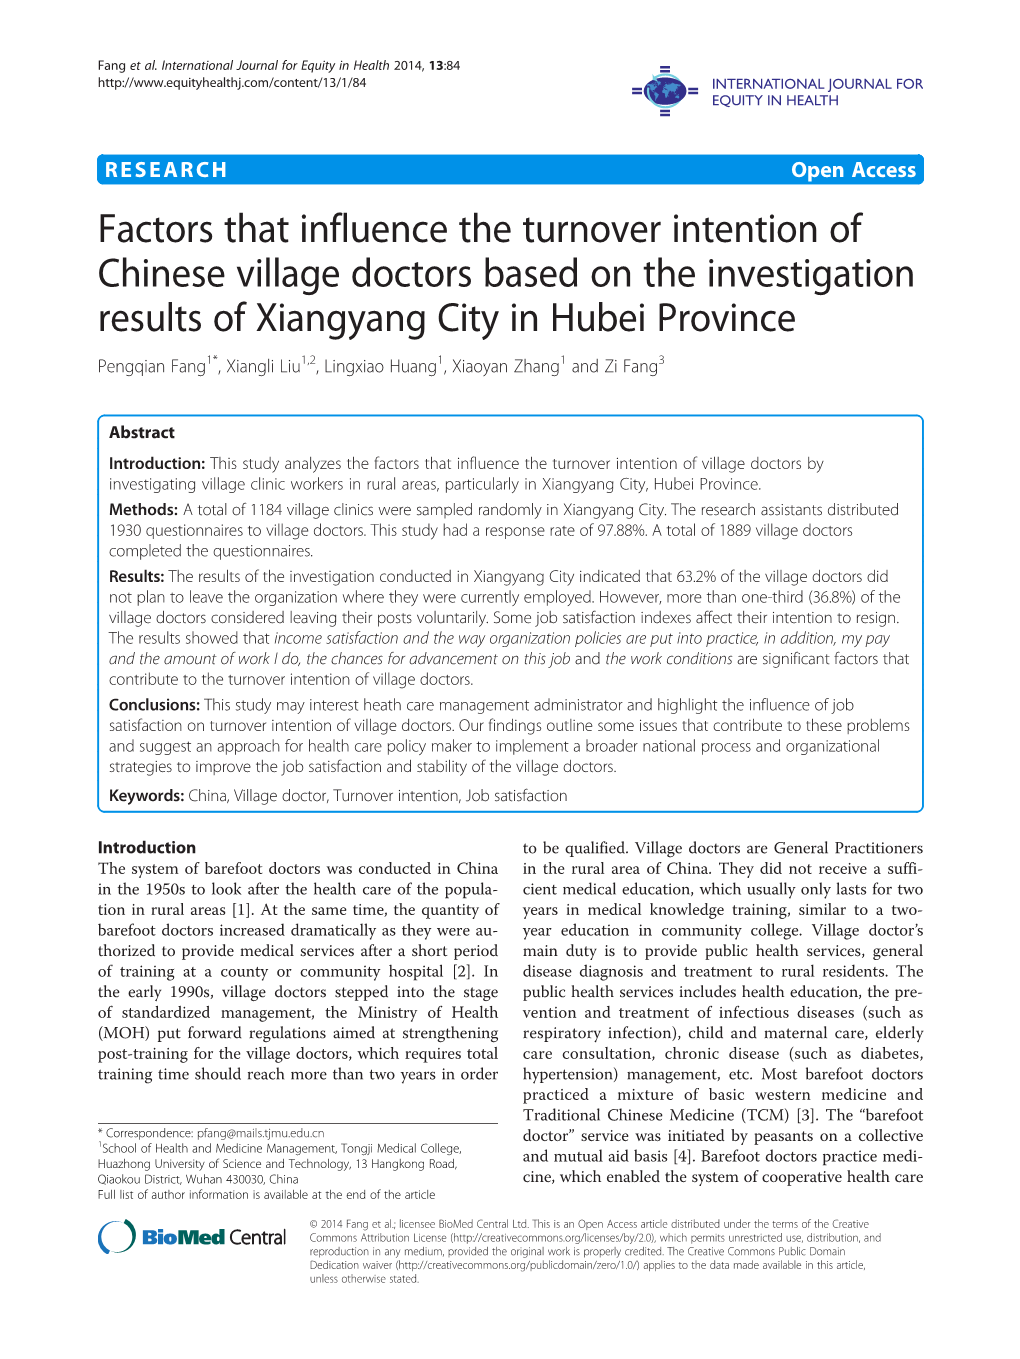 Factors That Influence the Turnover Intention of Chinese Village Doctors